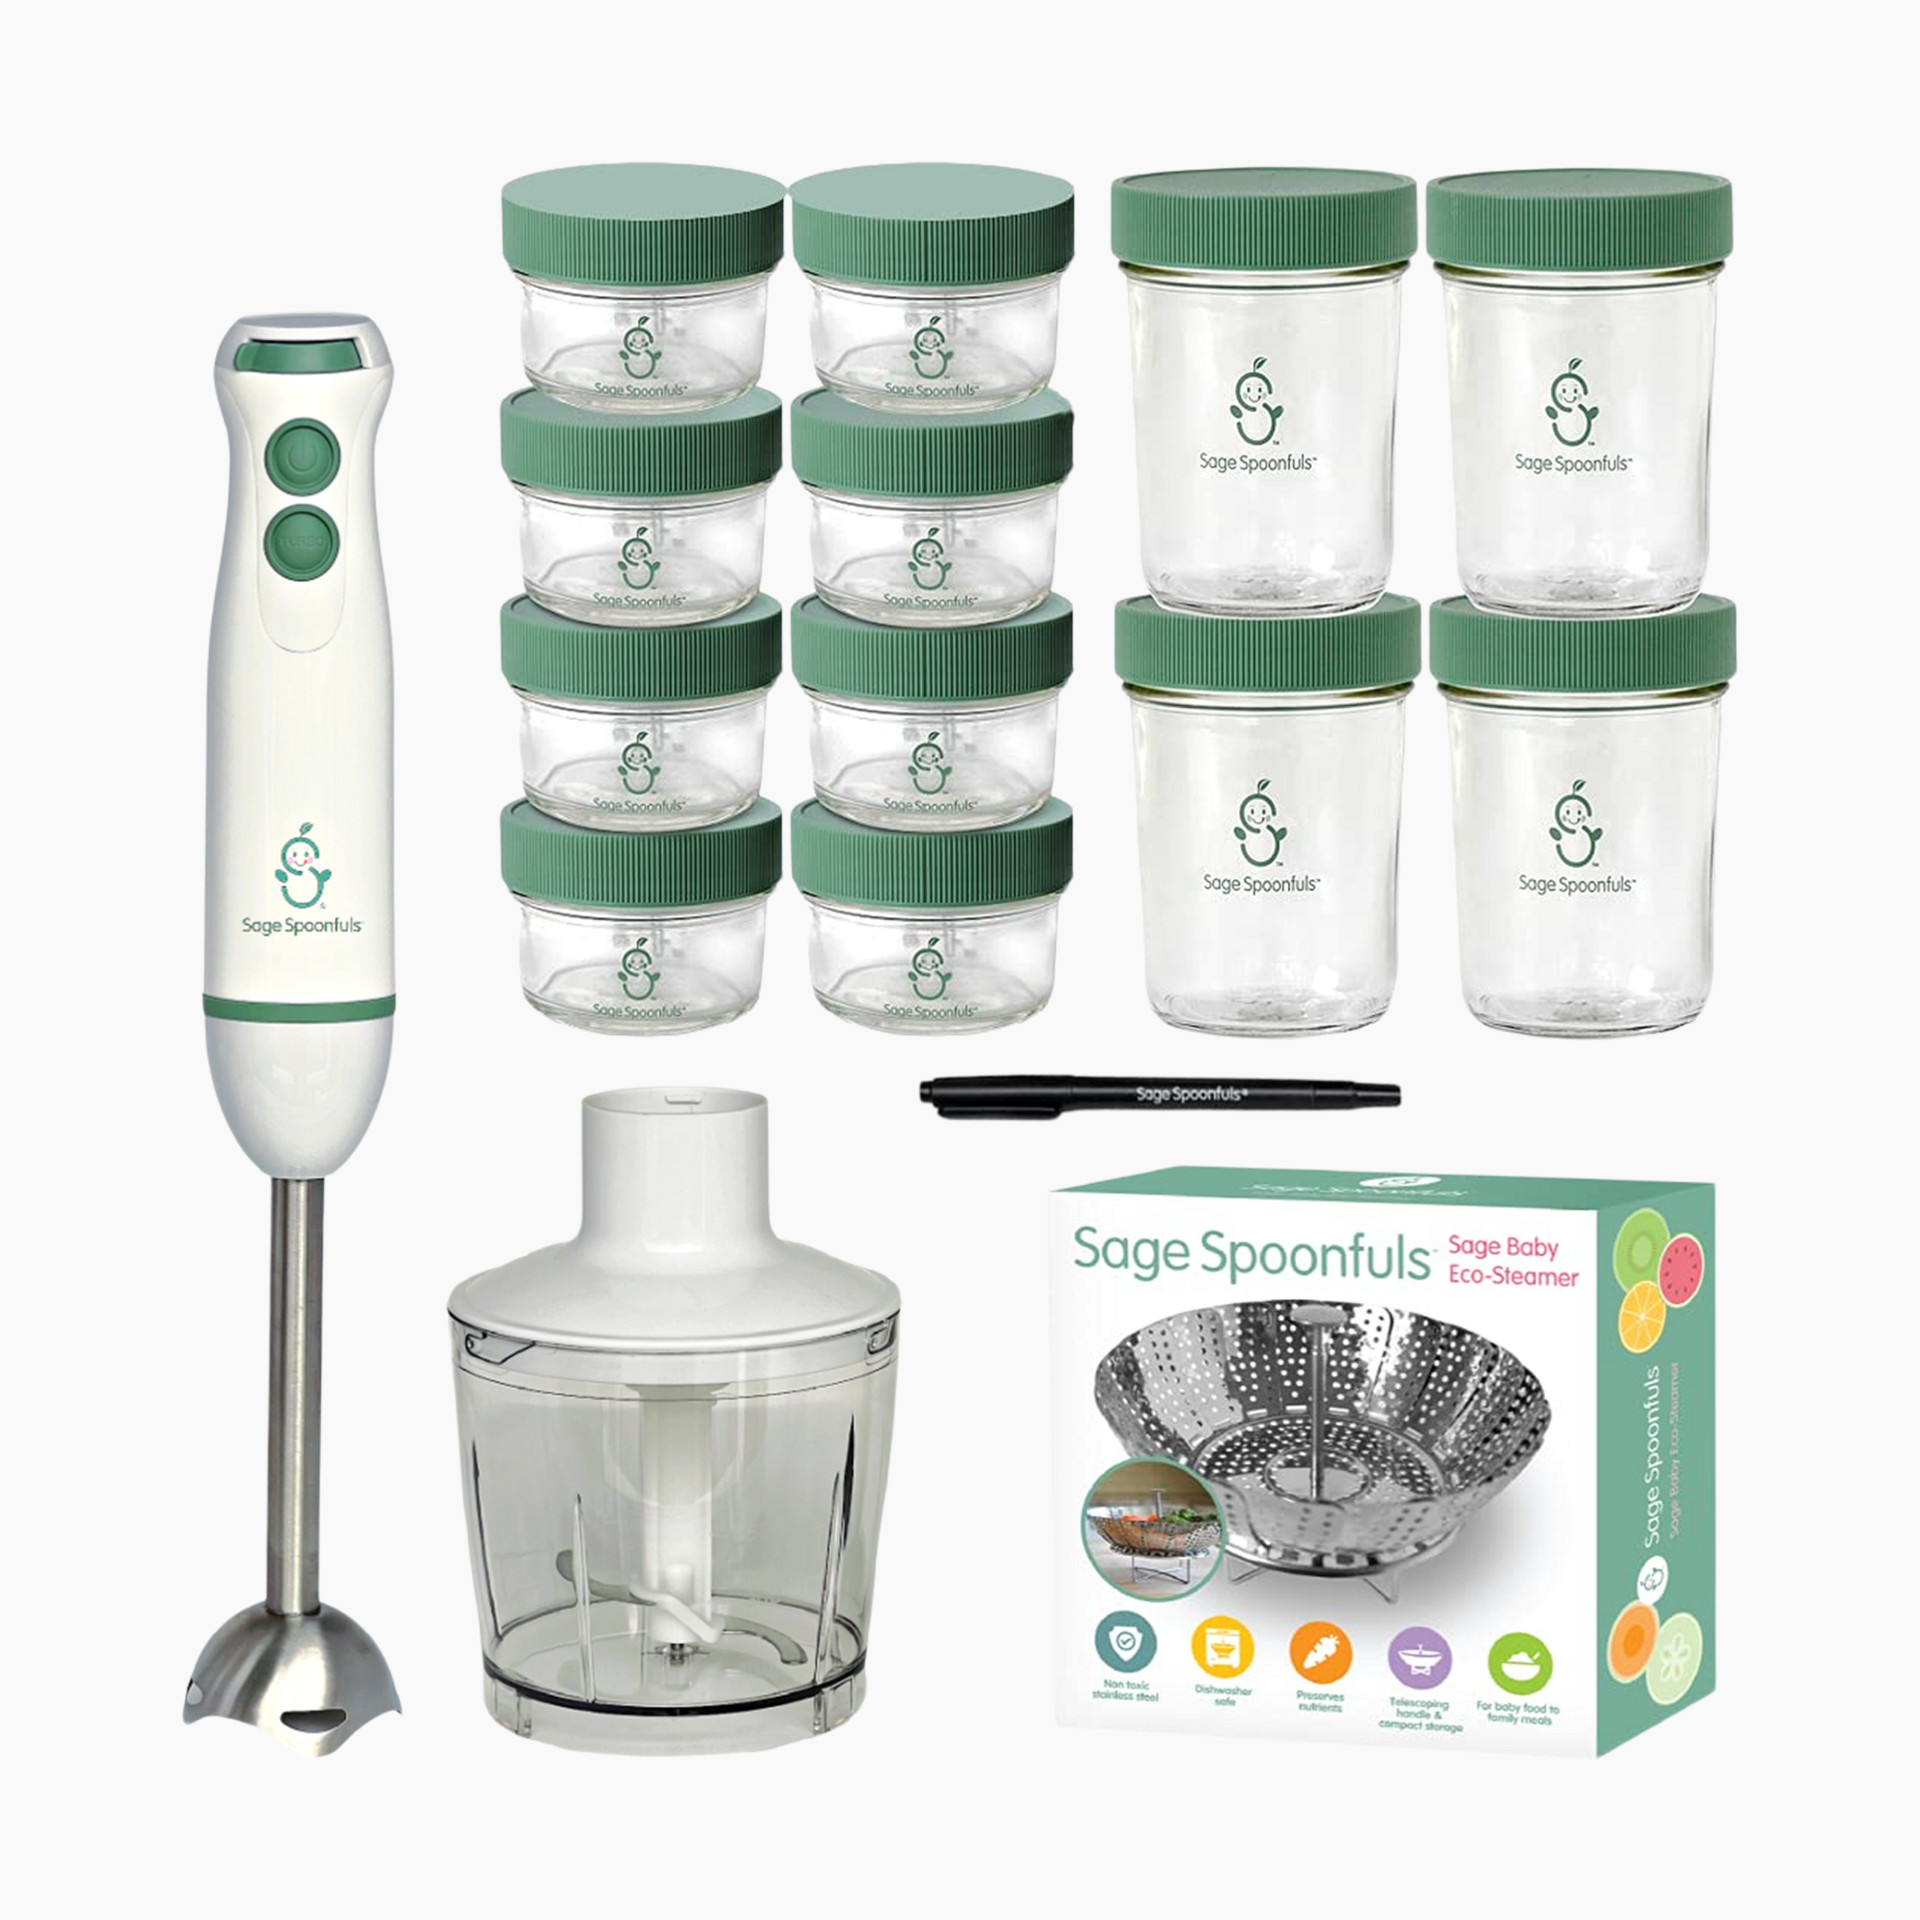 Sage Spoonfuls 2-in-1 Baby Food Maker, Baby Food Processor And